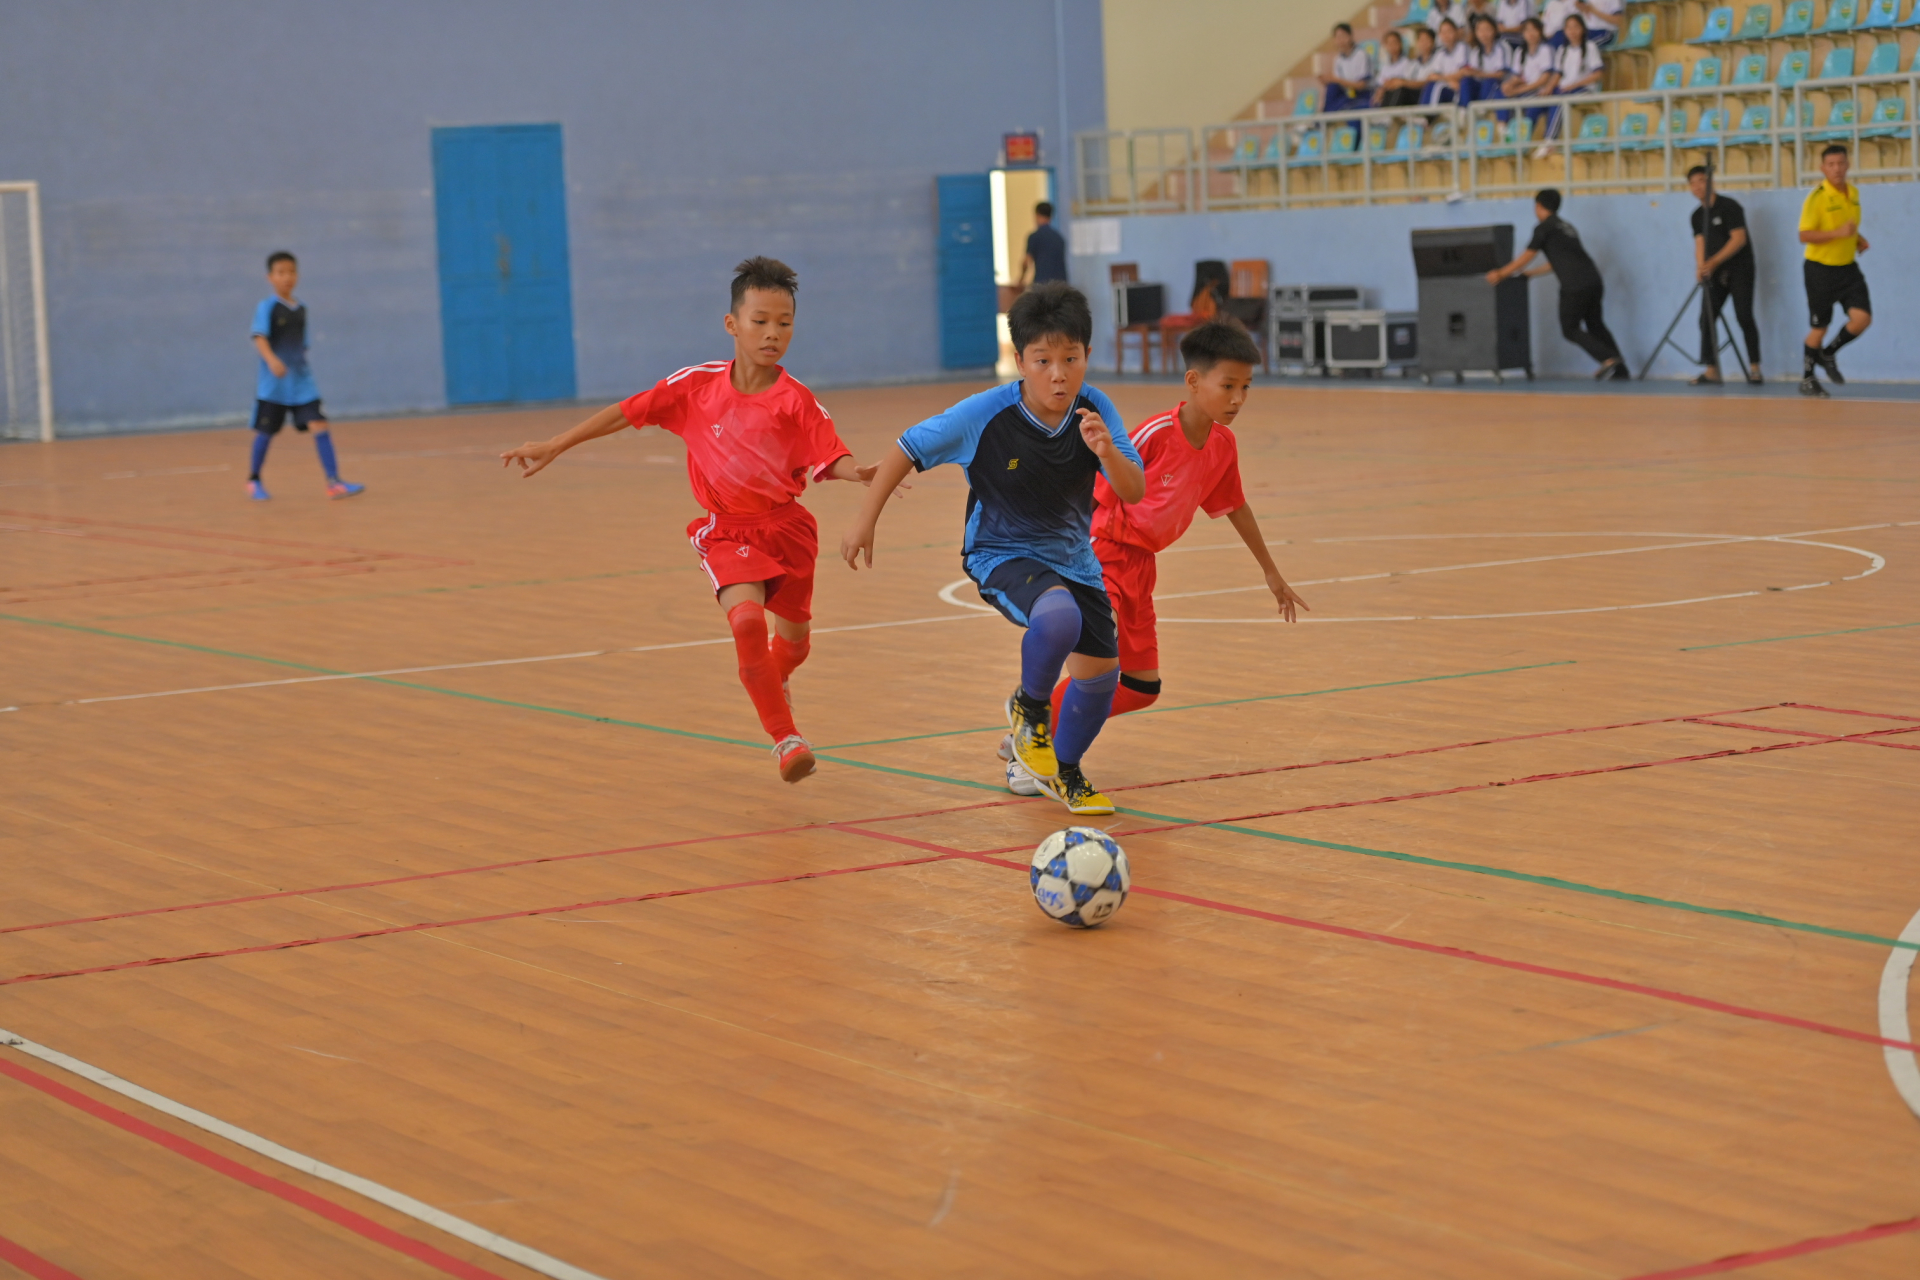 Primary pupils playing football in the festival

